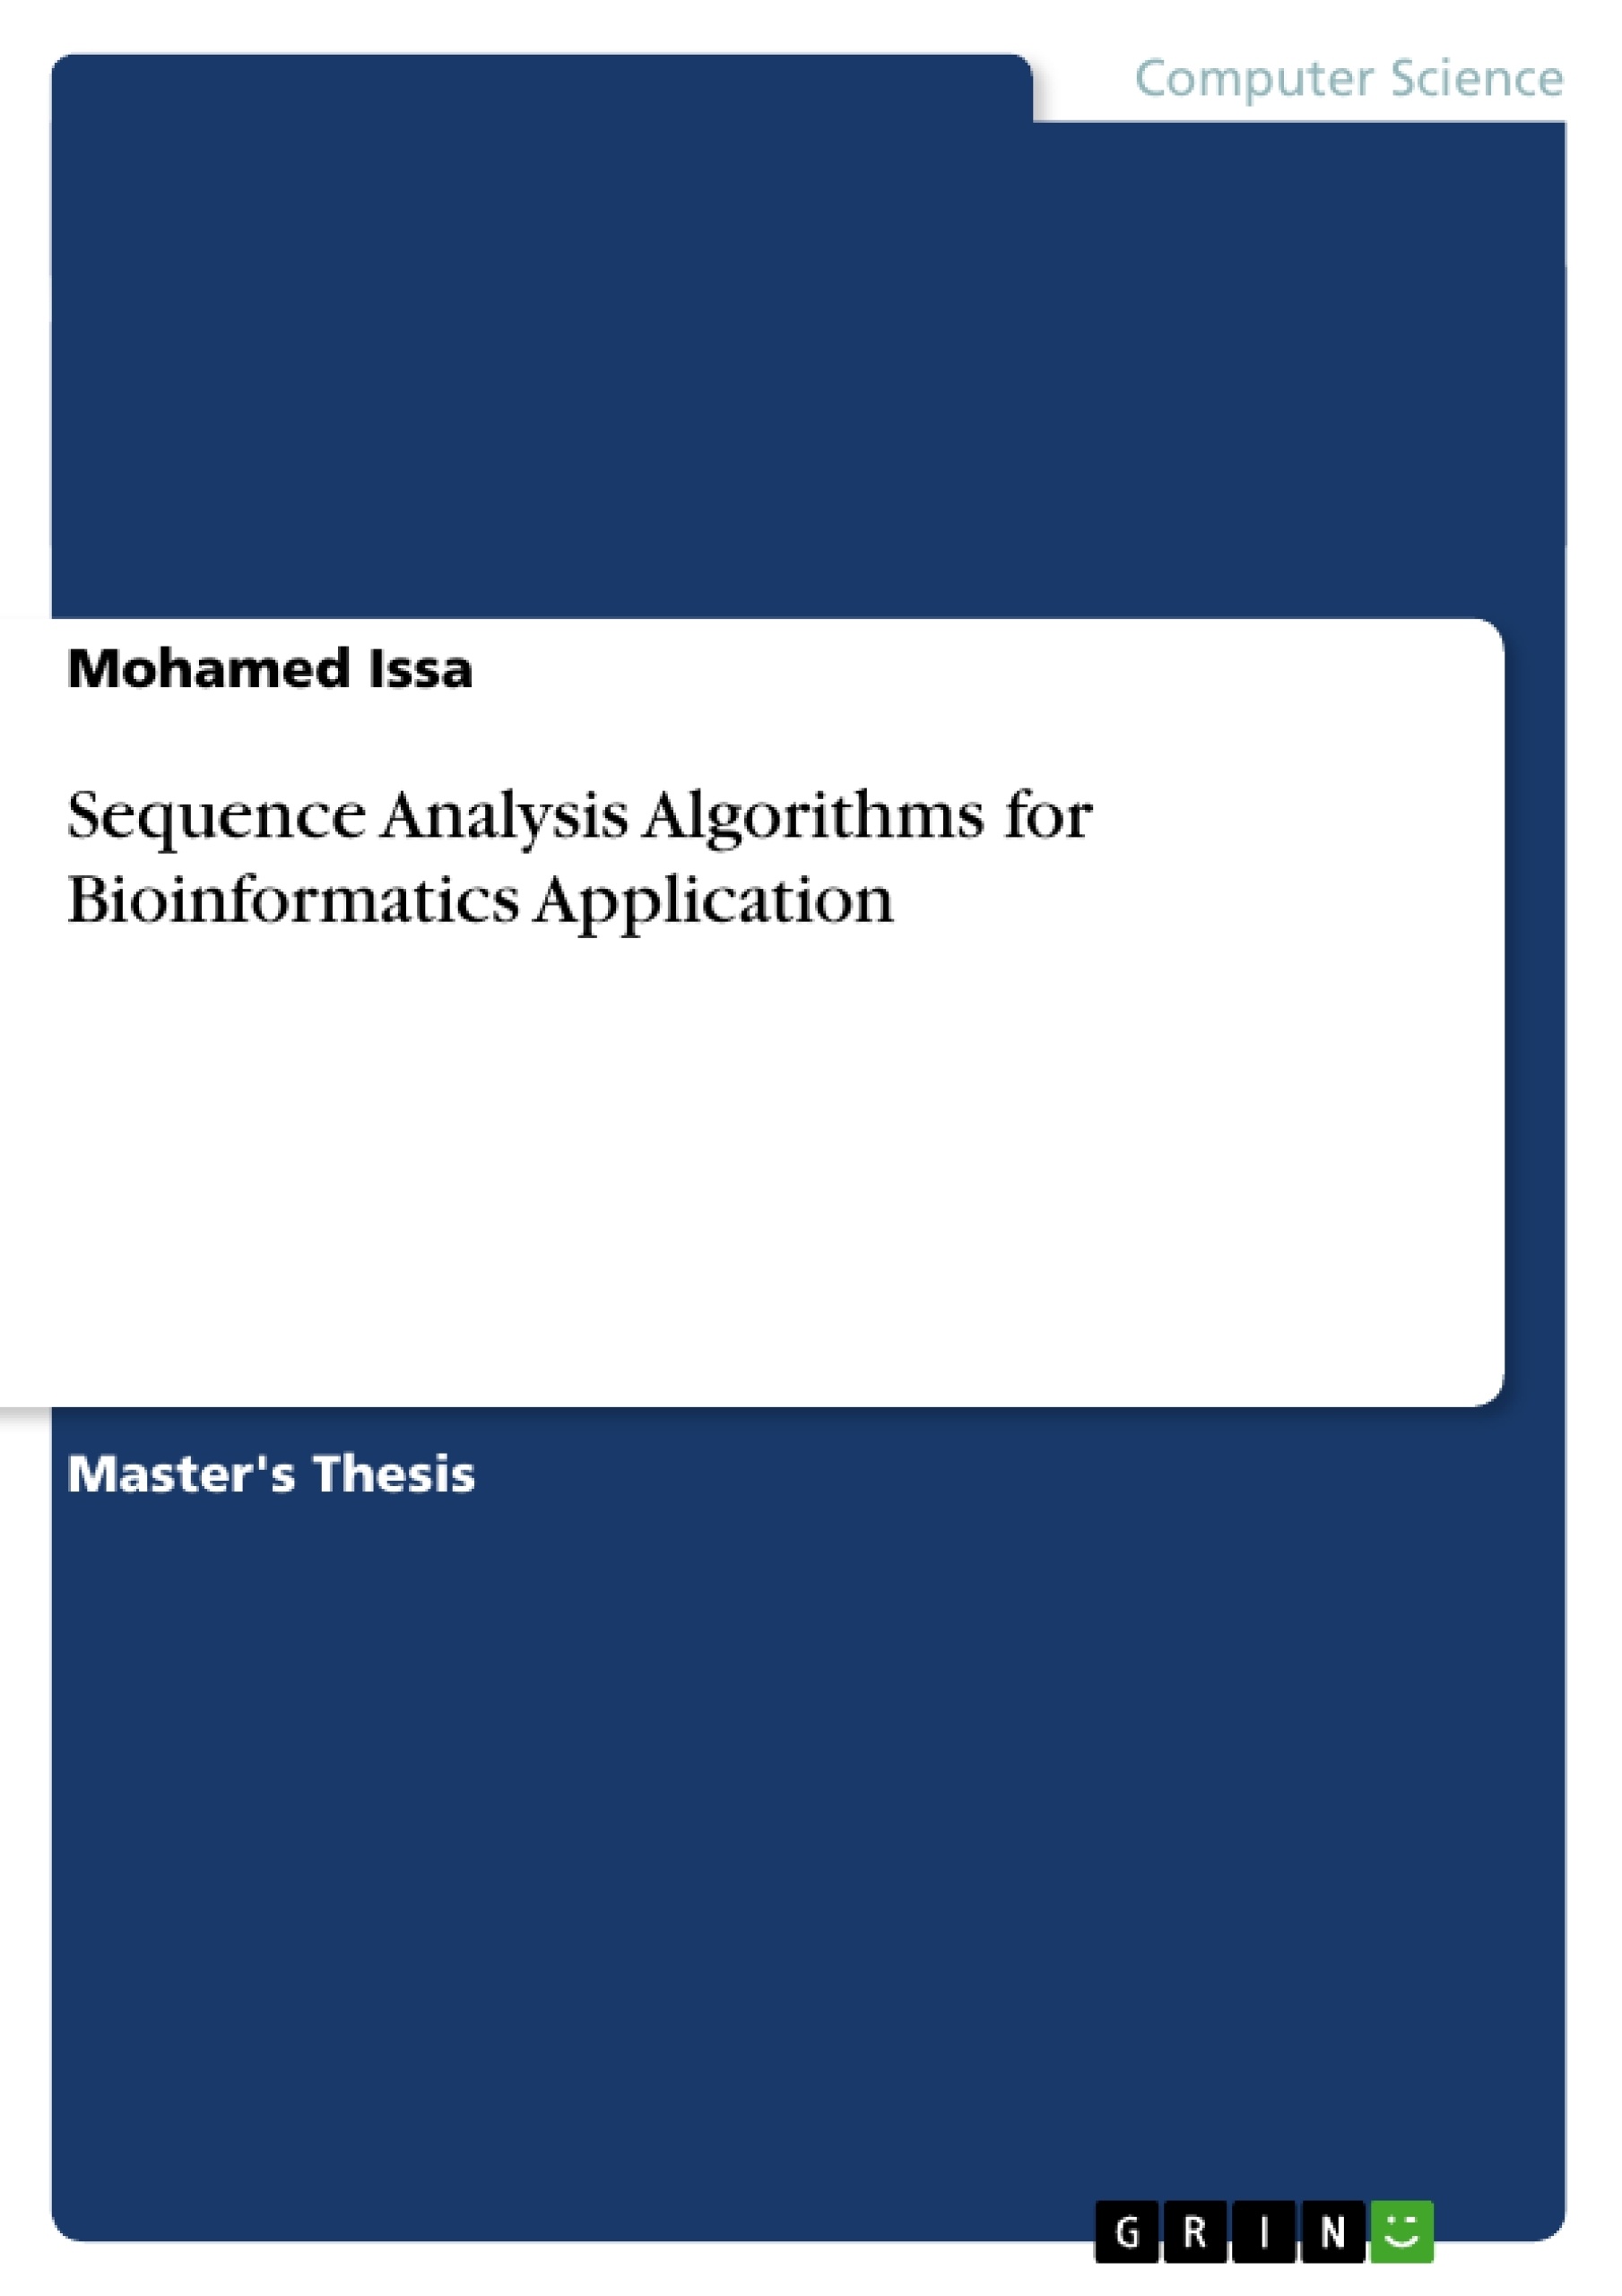 Title: Sequence Analysis Algorithms for Bioinformatics Application